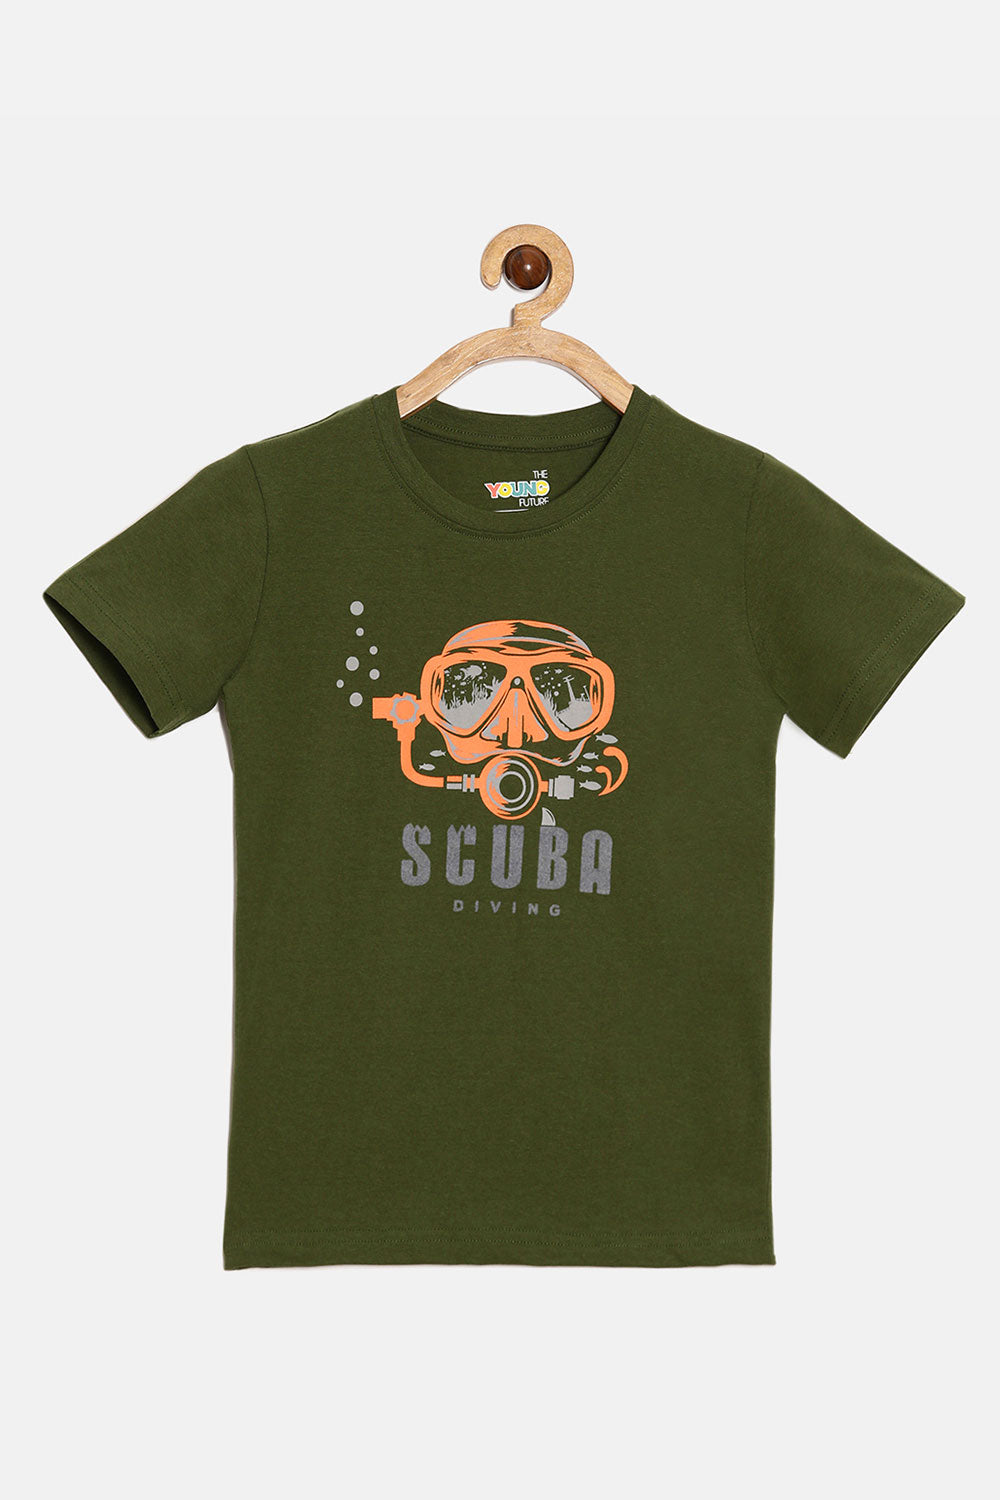 The Young Future - Boys T-shirt - Light Olive Green - BC09